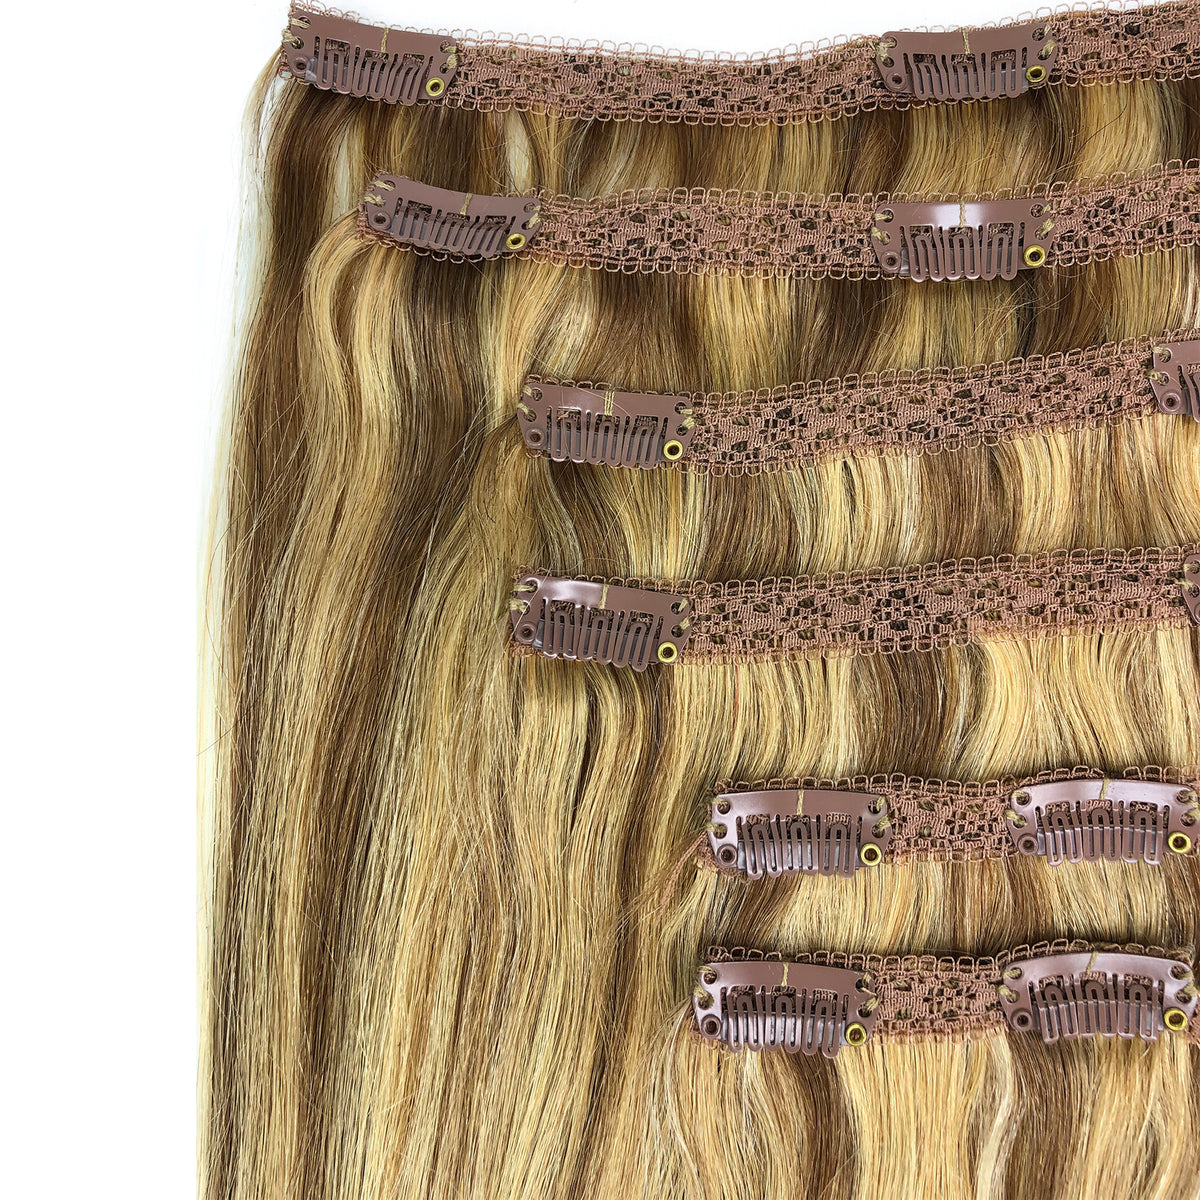 Buy Clip In Human Hair Extension & 100% Human Hair Lace Wigs - eHair Outlet